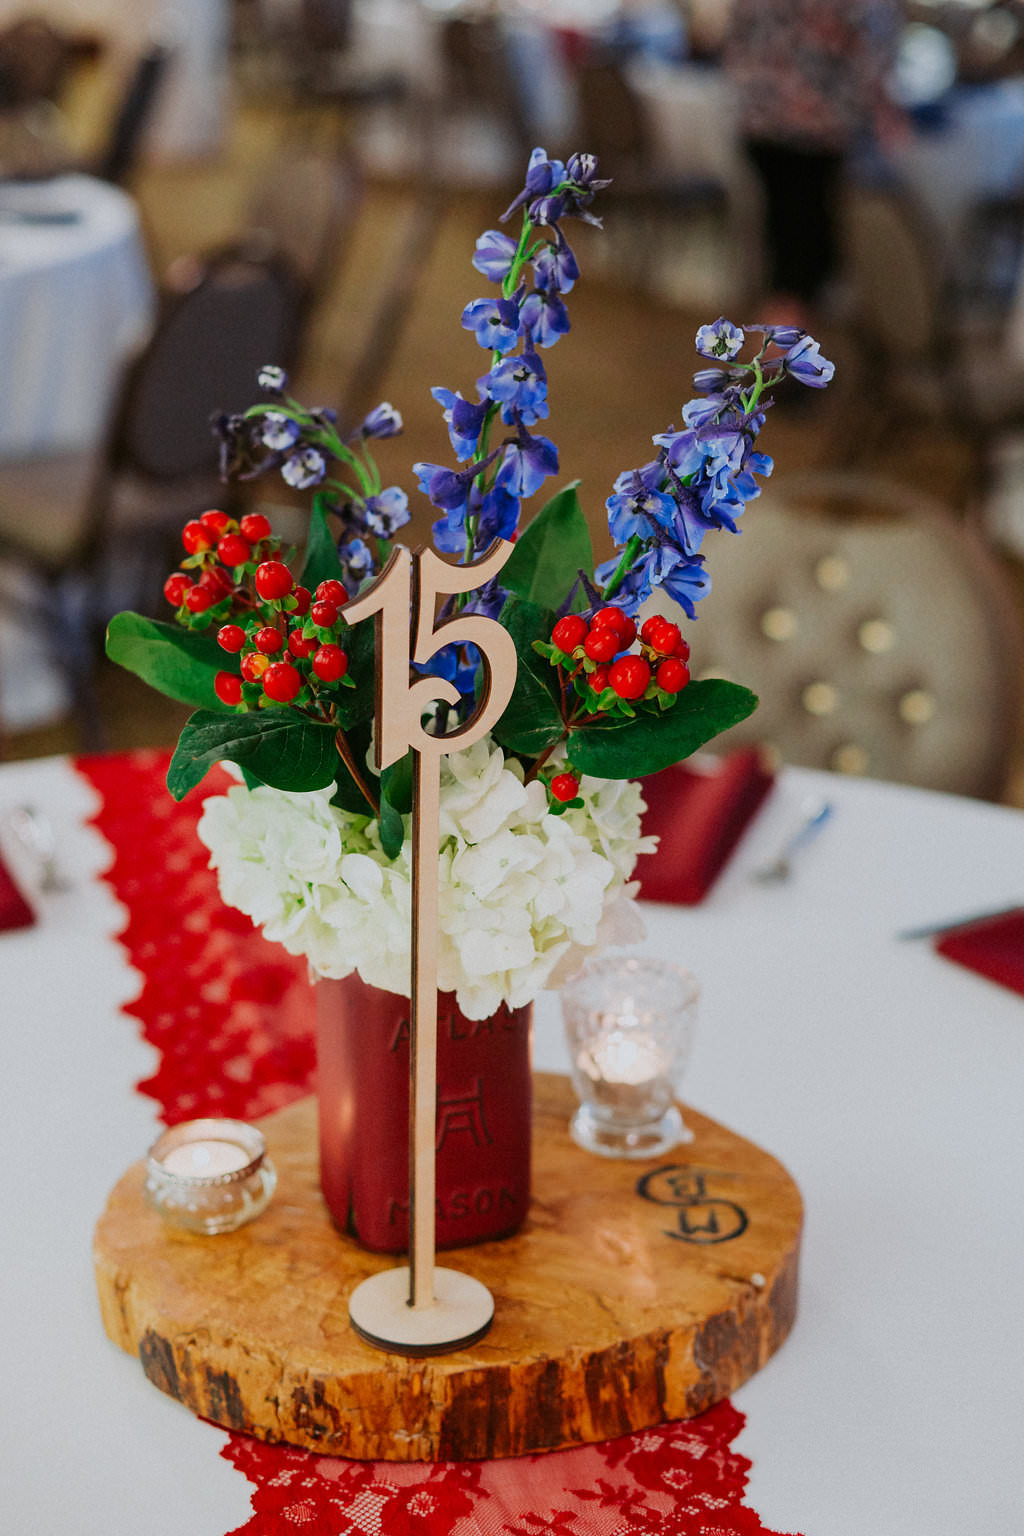 Americana Inspired Vintage Low Wedding Centerpiece with Blue and White Flowers and Red Berries with Greenery in Painted Vase on Natural Wood Round, with White Linens and Red Lace Runner and Laser Cut Wooden Table Number | Tampa Bay Wedding Planner Special Moments Event Planning | St Pete Florist Apple Blossoms Floral Designs